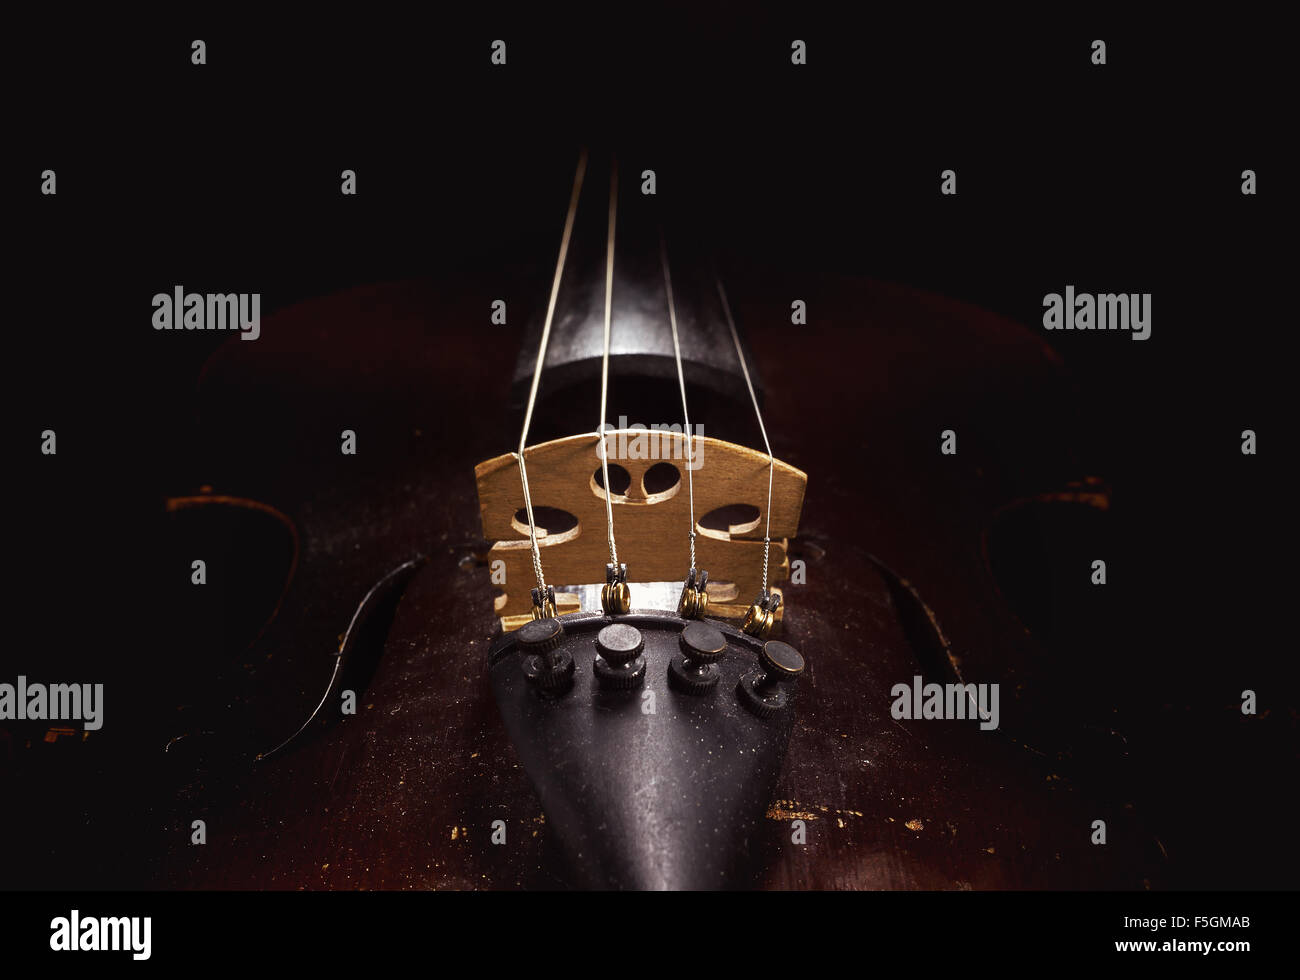 Old violin details, body part and neck. Stock Photo